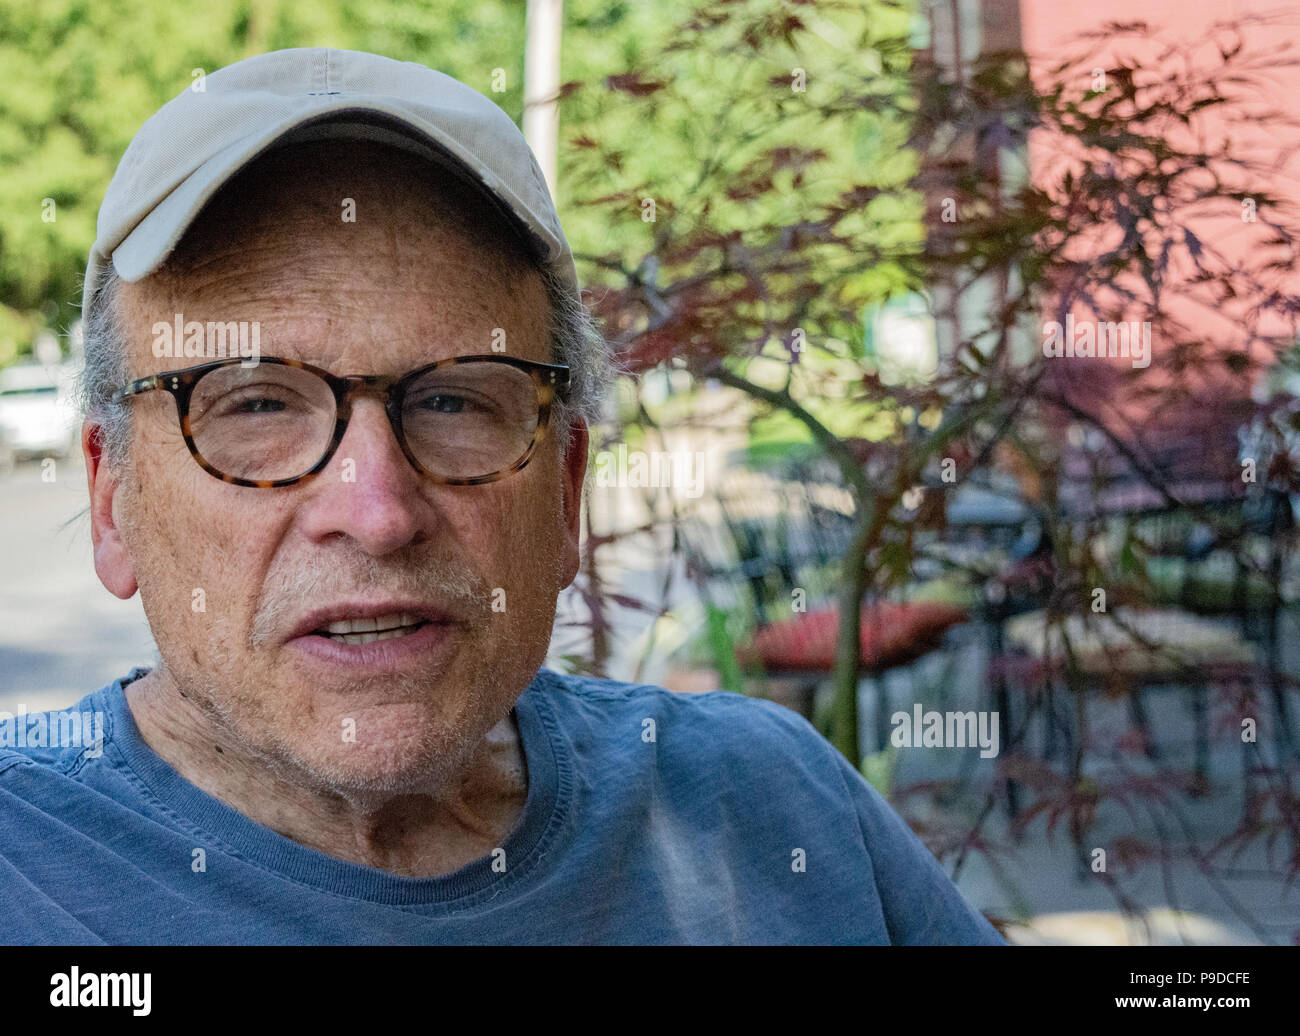 Older man conversing wearing a cap and glasses Stock Photo